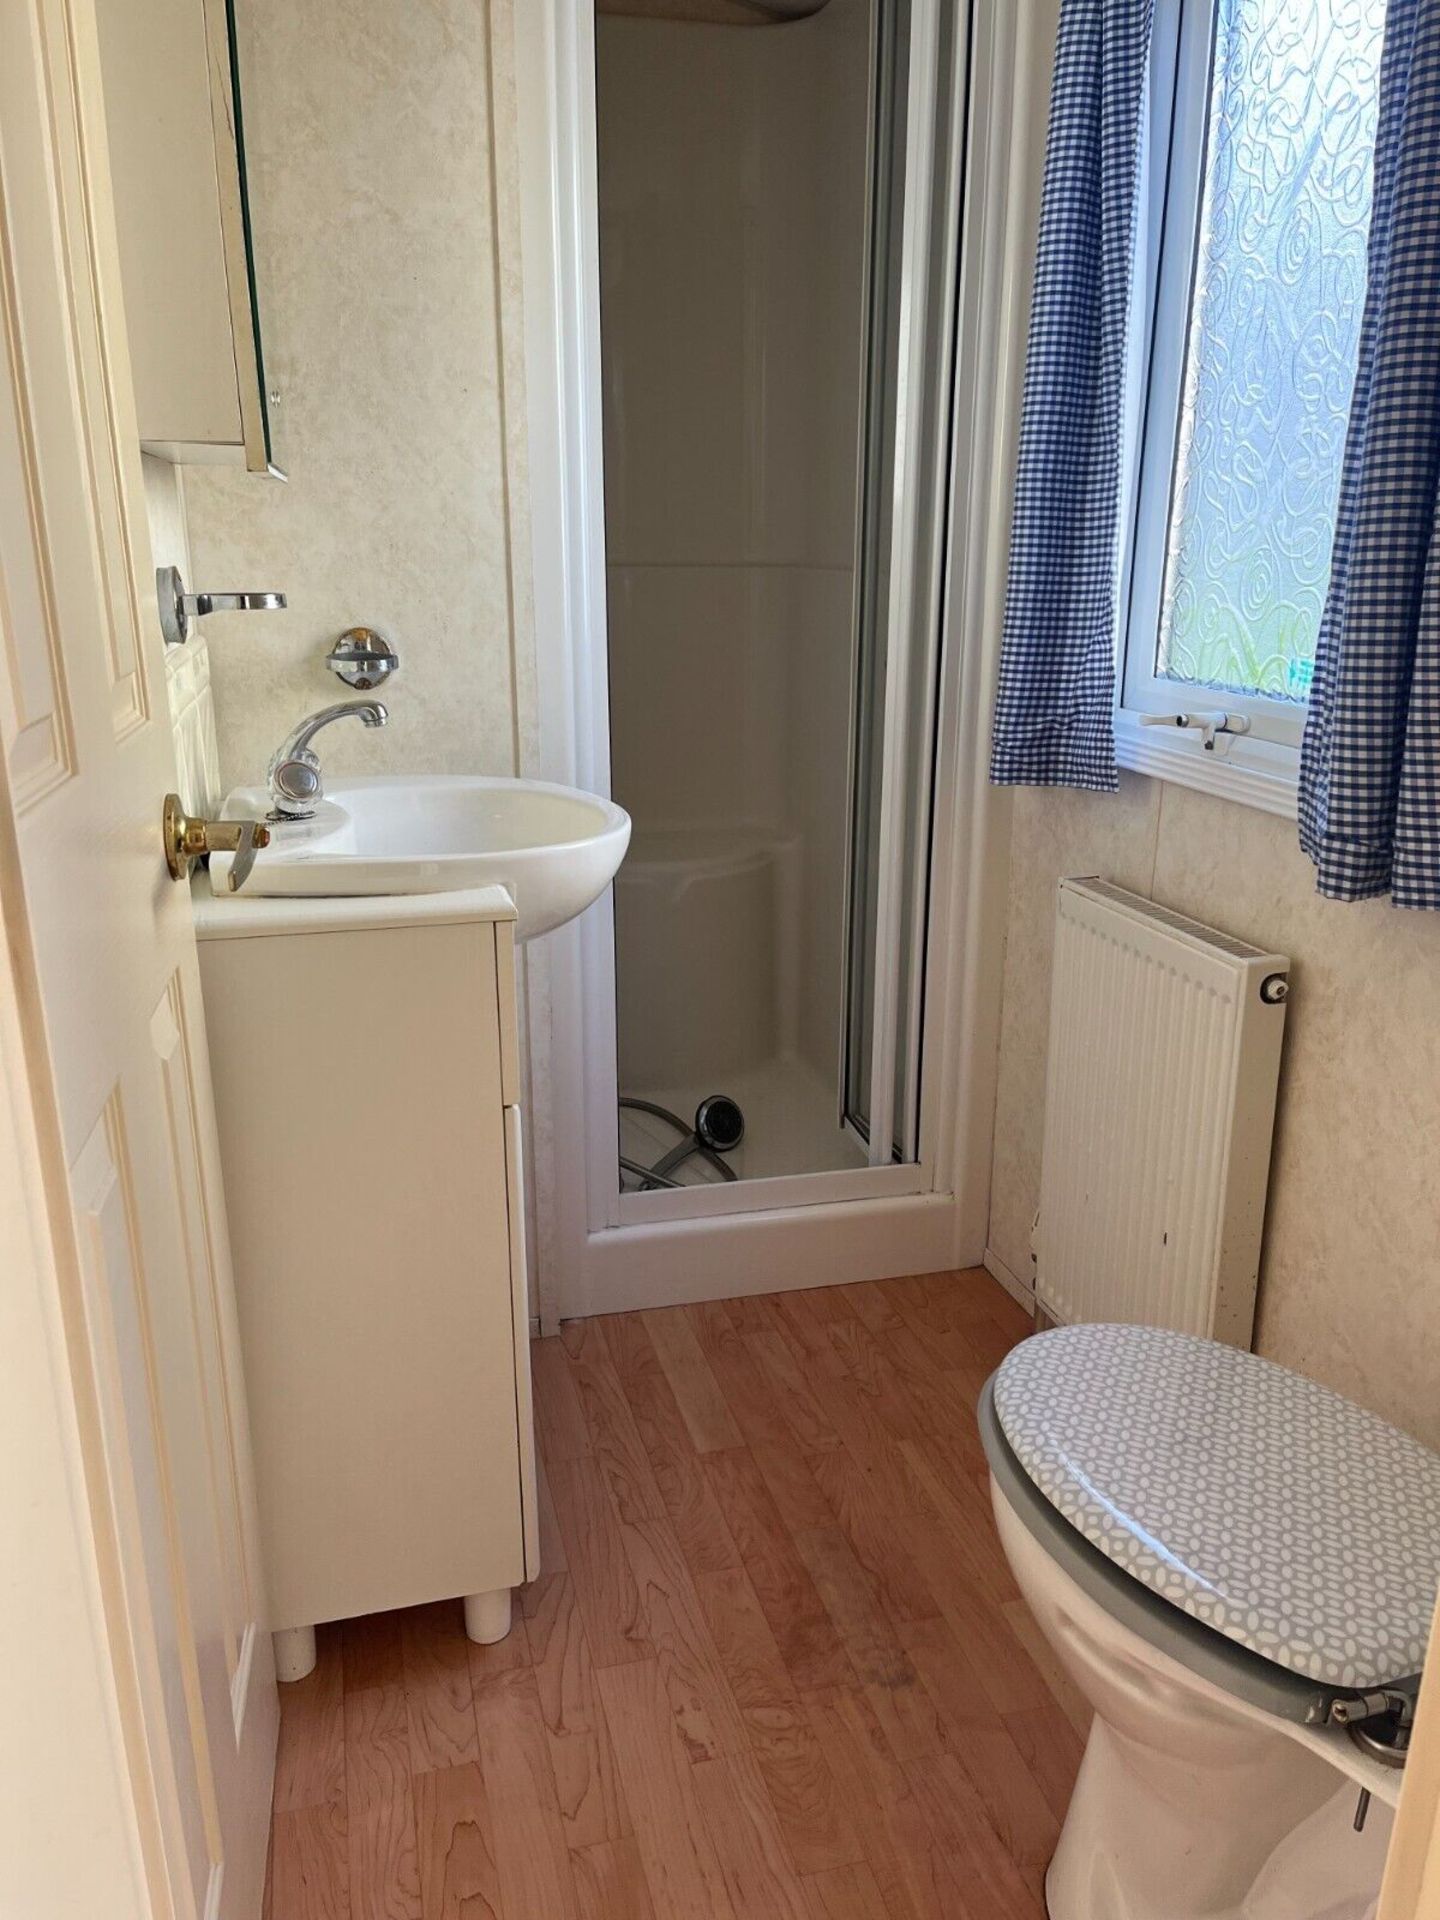 UPGRADE POTENTIAL: WILLERBY WESTMOORLAND OFF-SITE SALE - Image 15 of 17